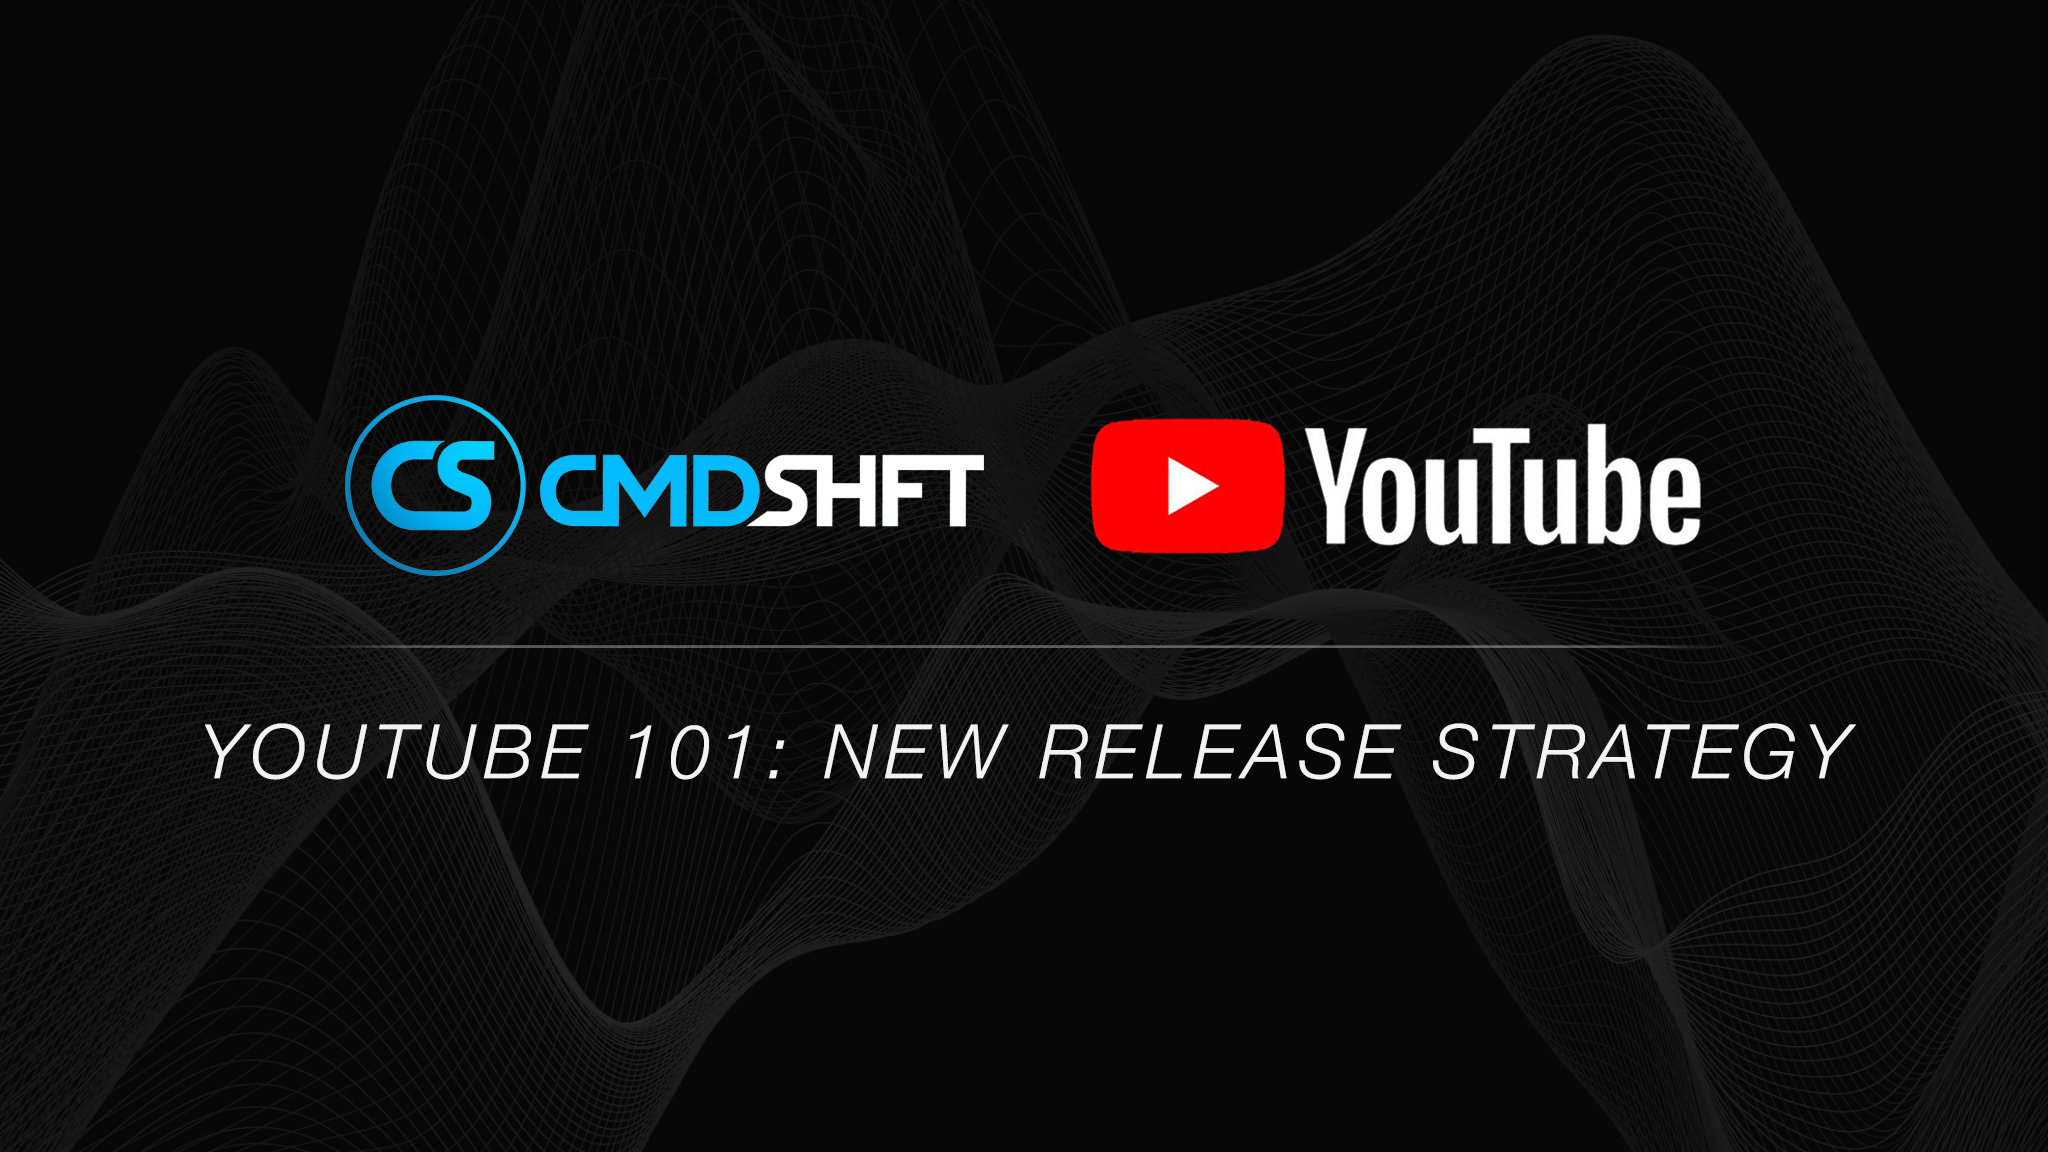 YouTube 101: New Release Strategy